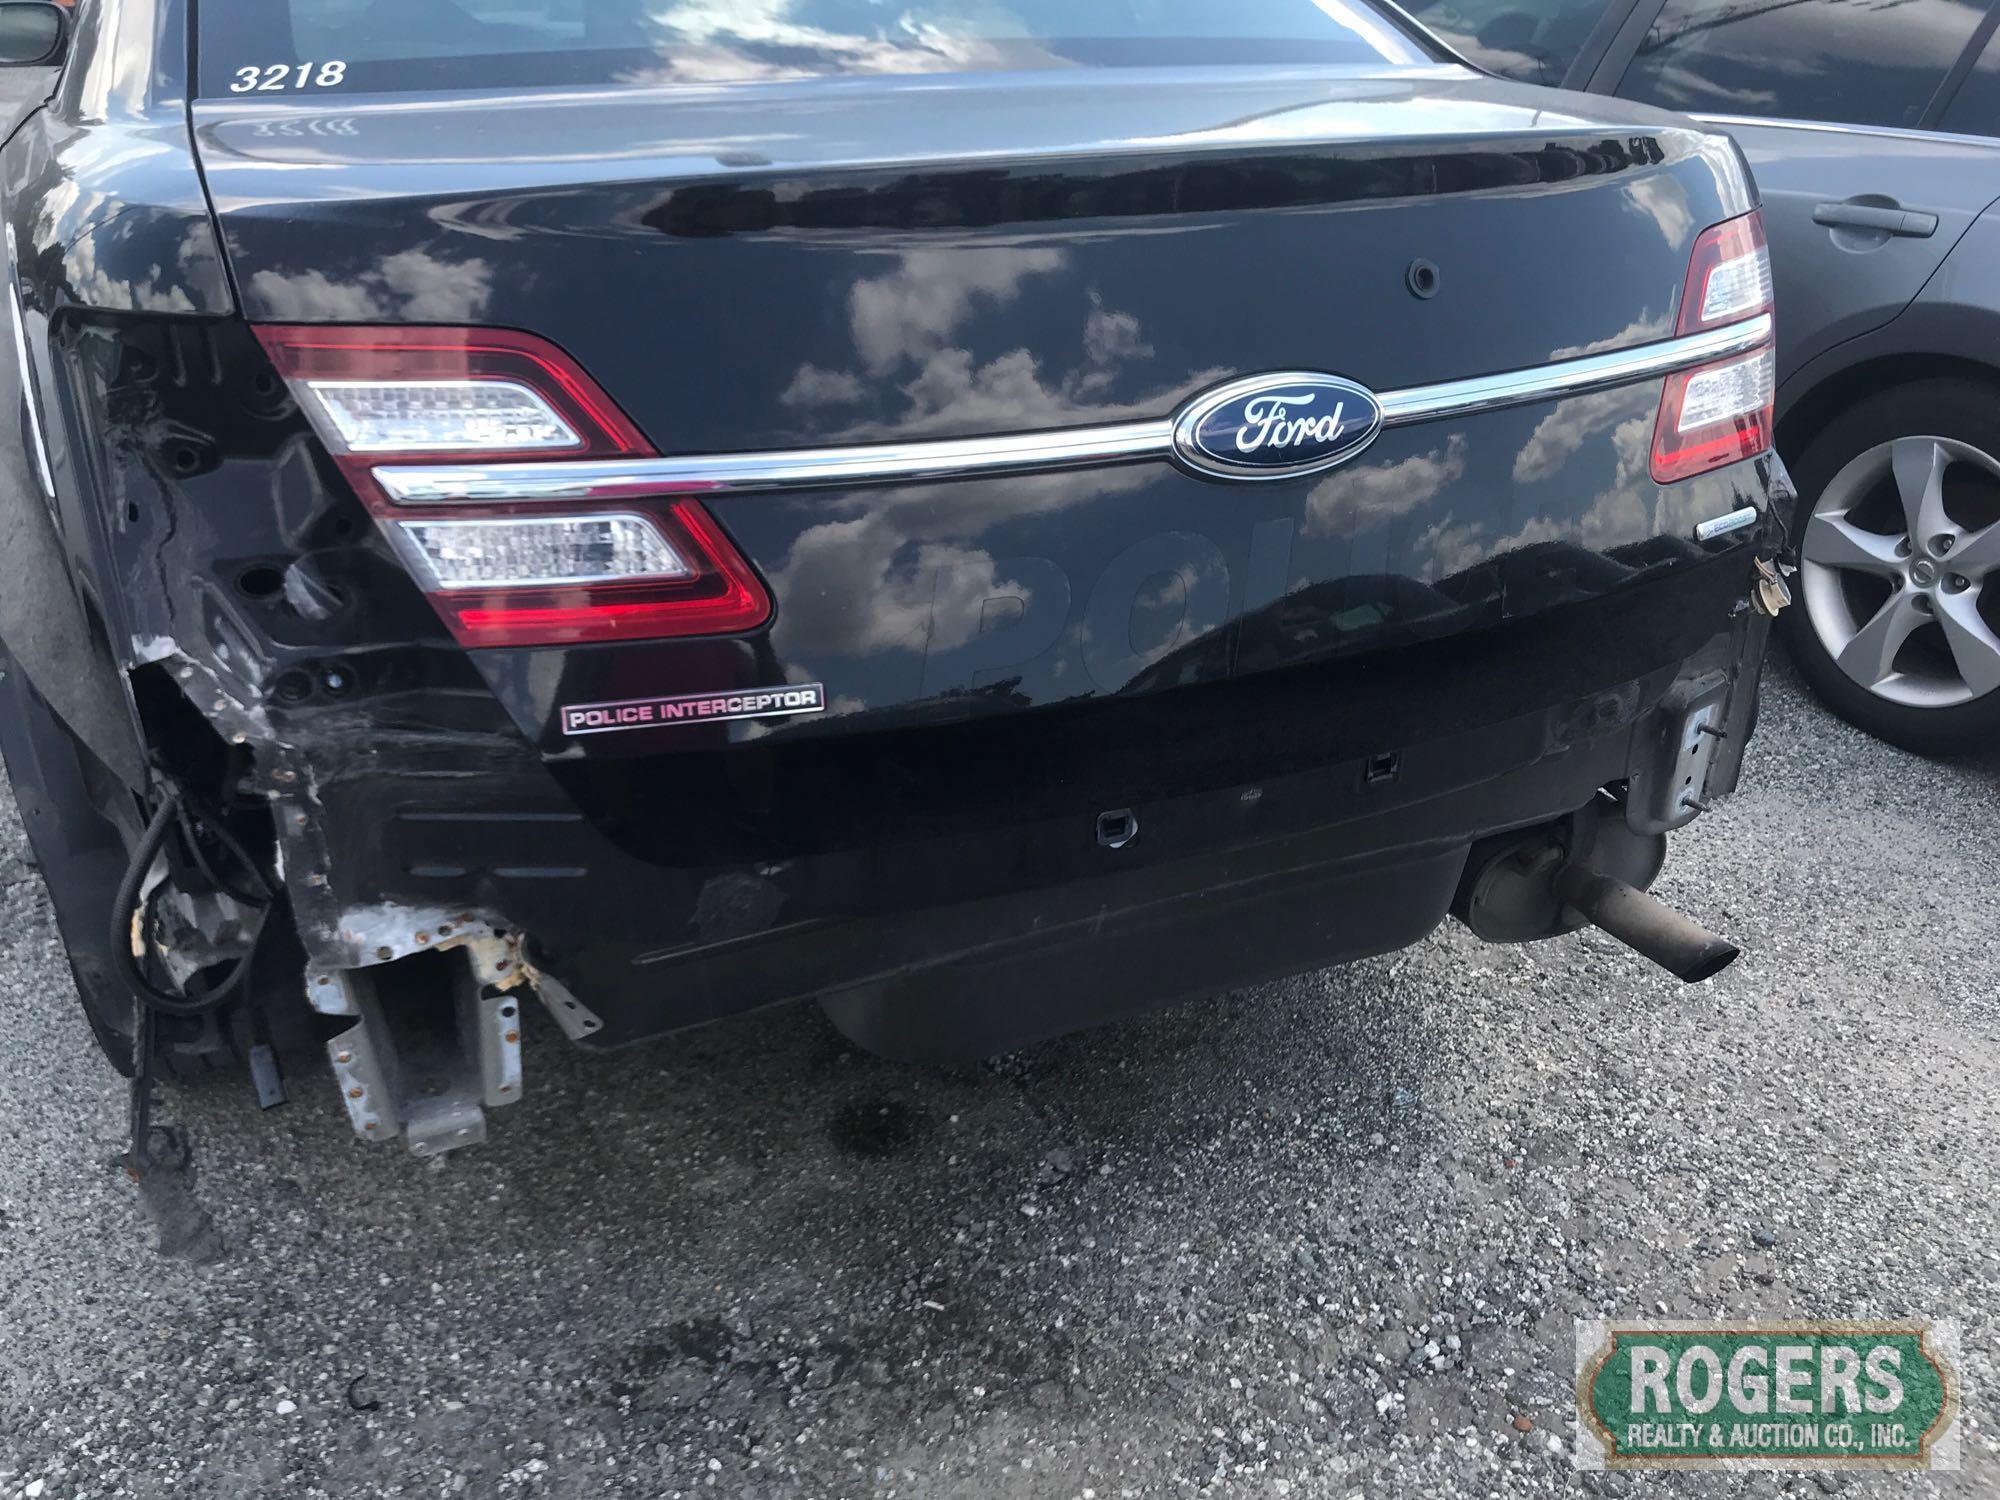 2013 Ford Interceptor, 3.5, 1FAHP2MTXDG143684, PARTS CAR NOT TOTALLED-MILEAGE UNKNOWN-NO KEYS